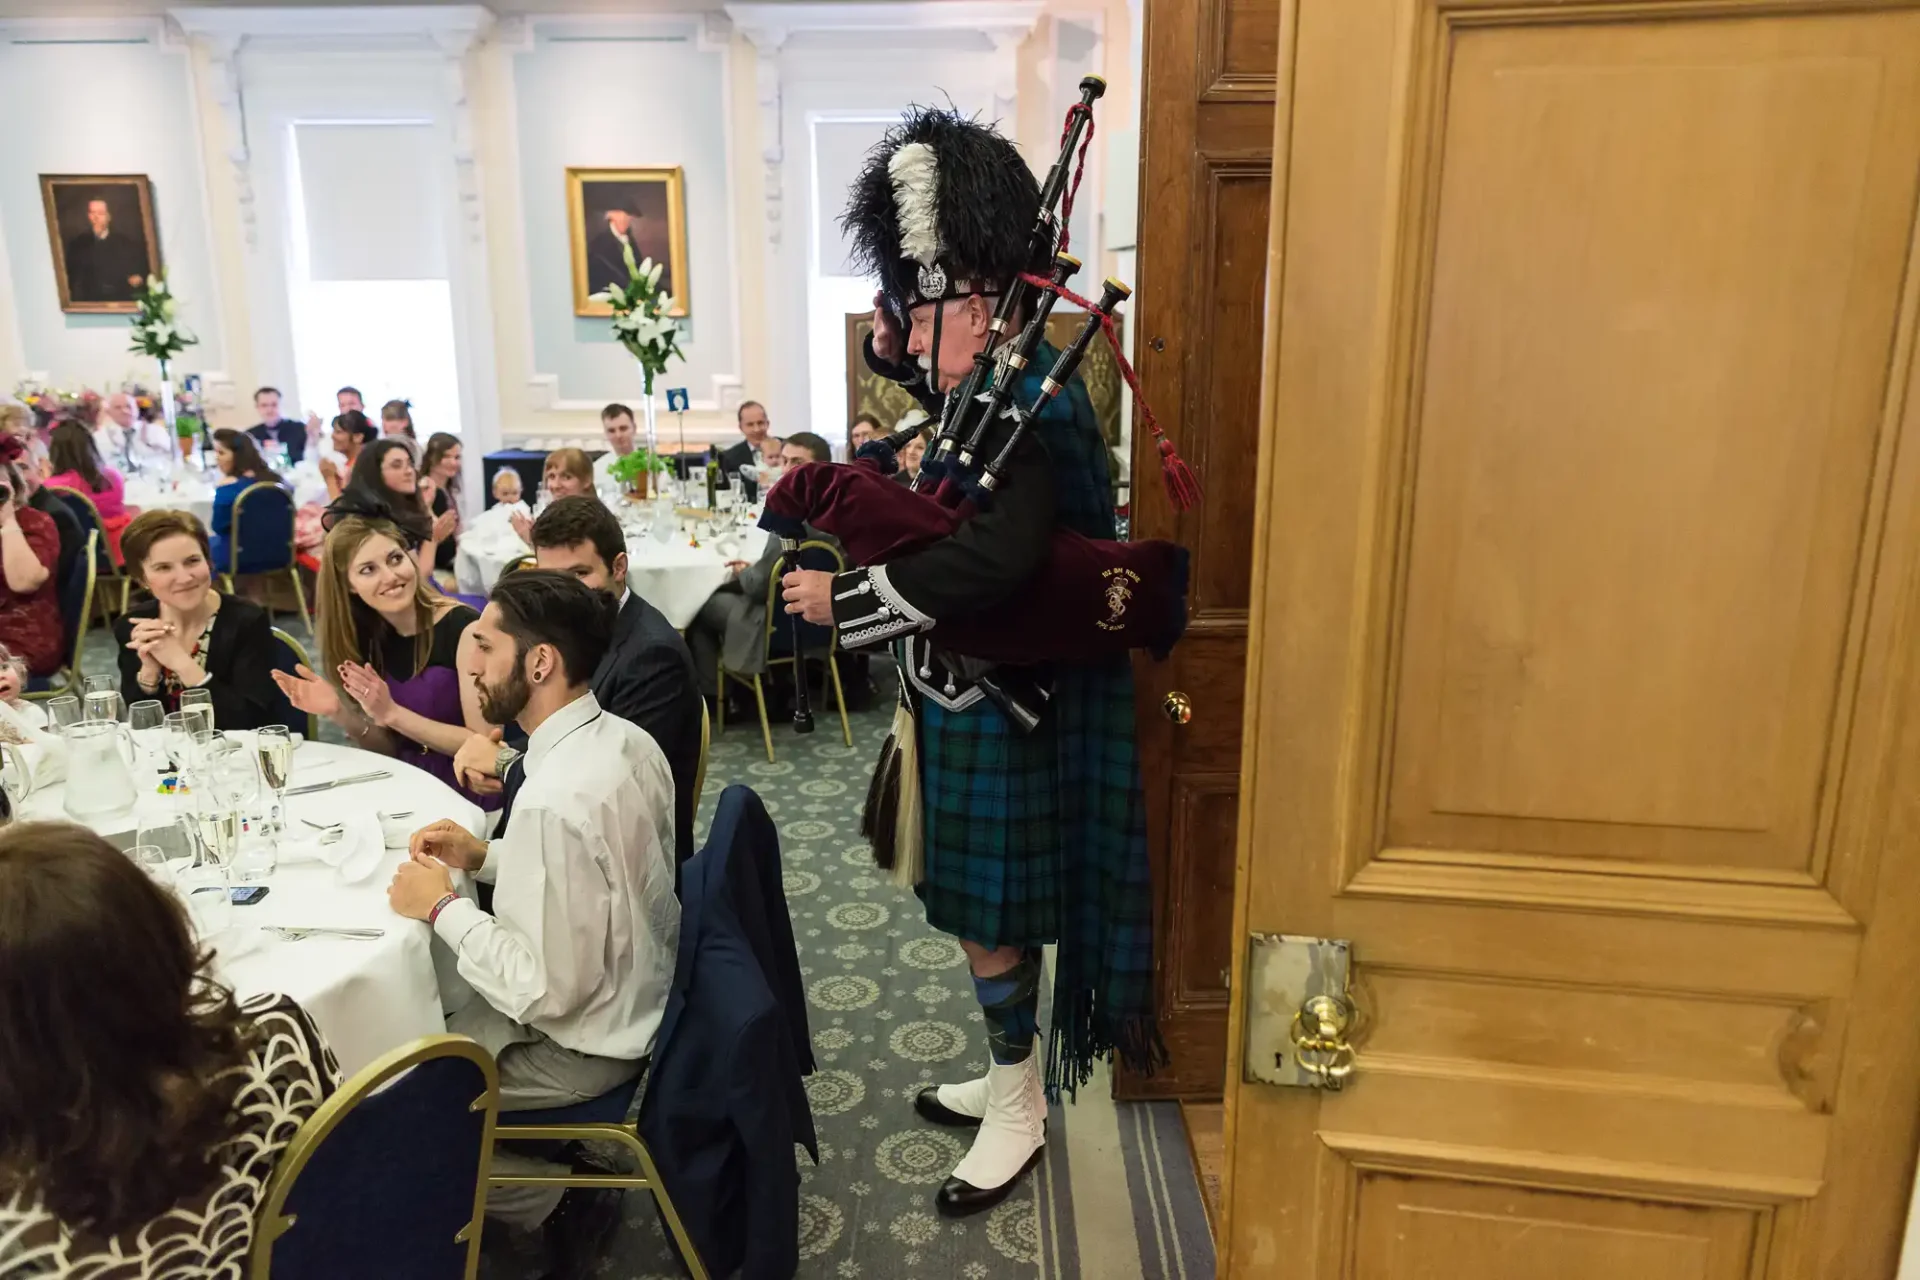 A bagpiper in traditional scottish attire playing for guests at a formal indoor dining event.